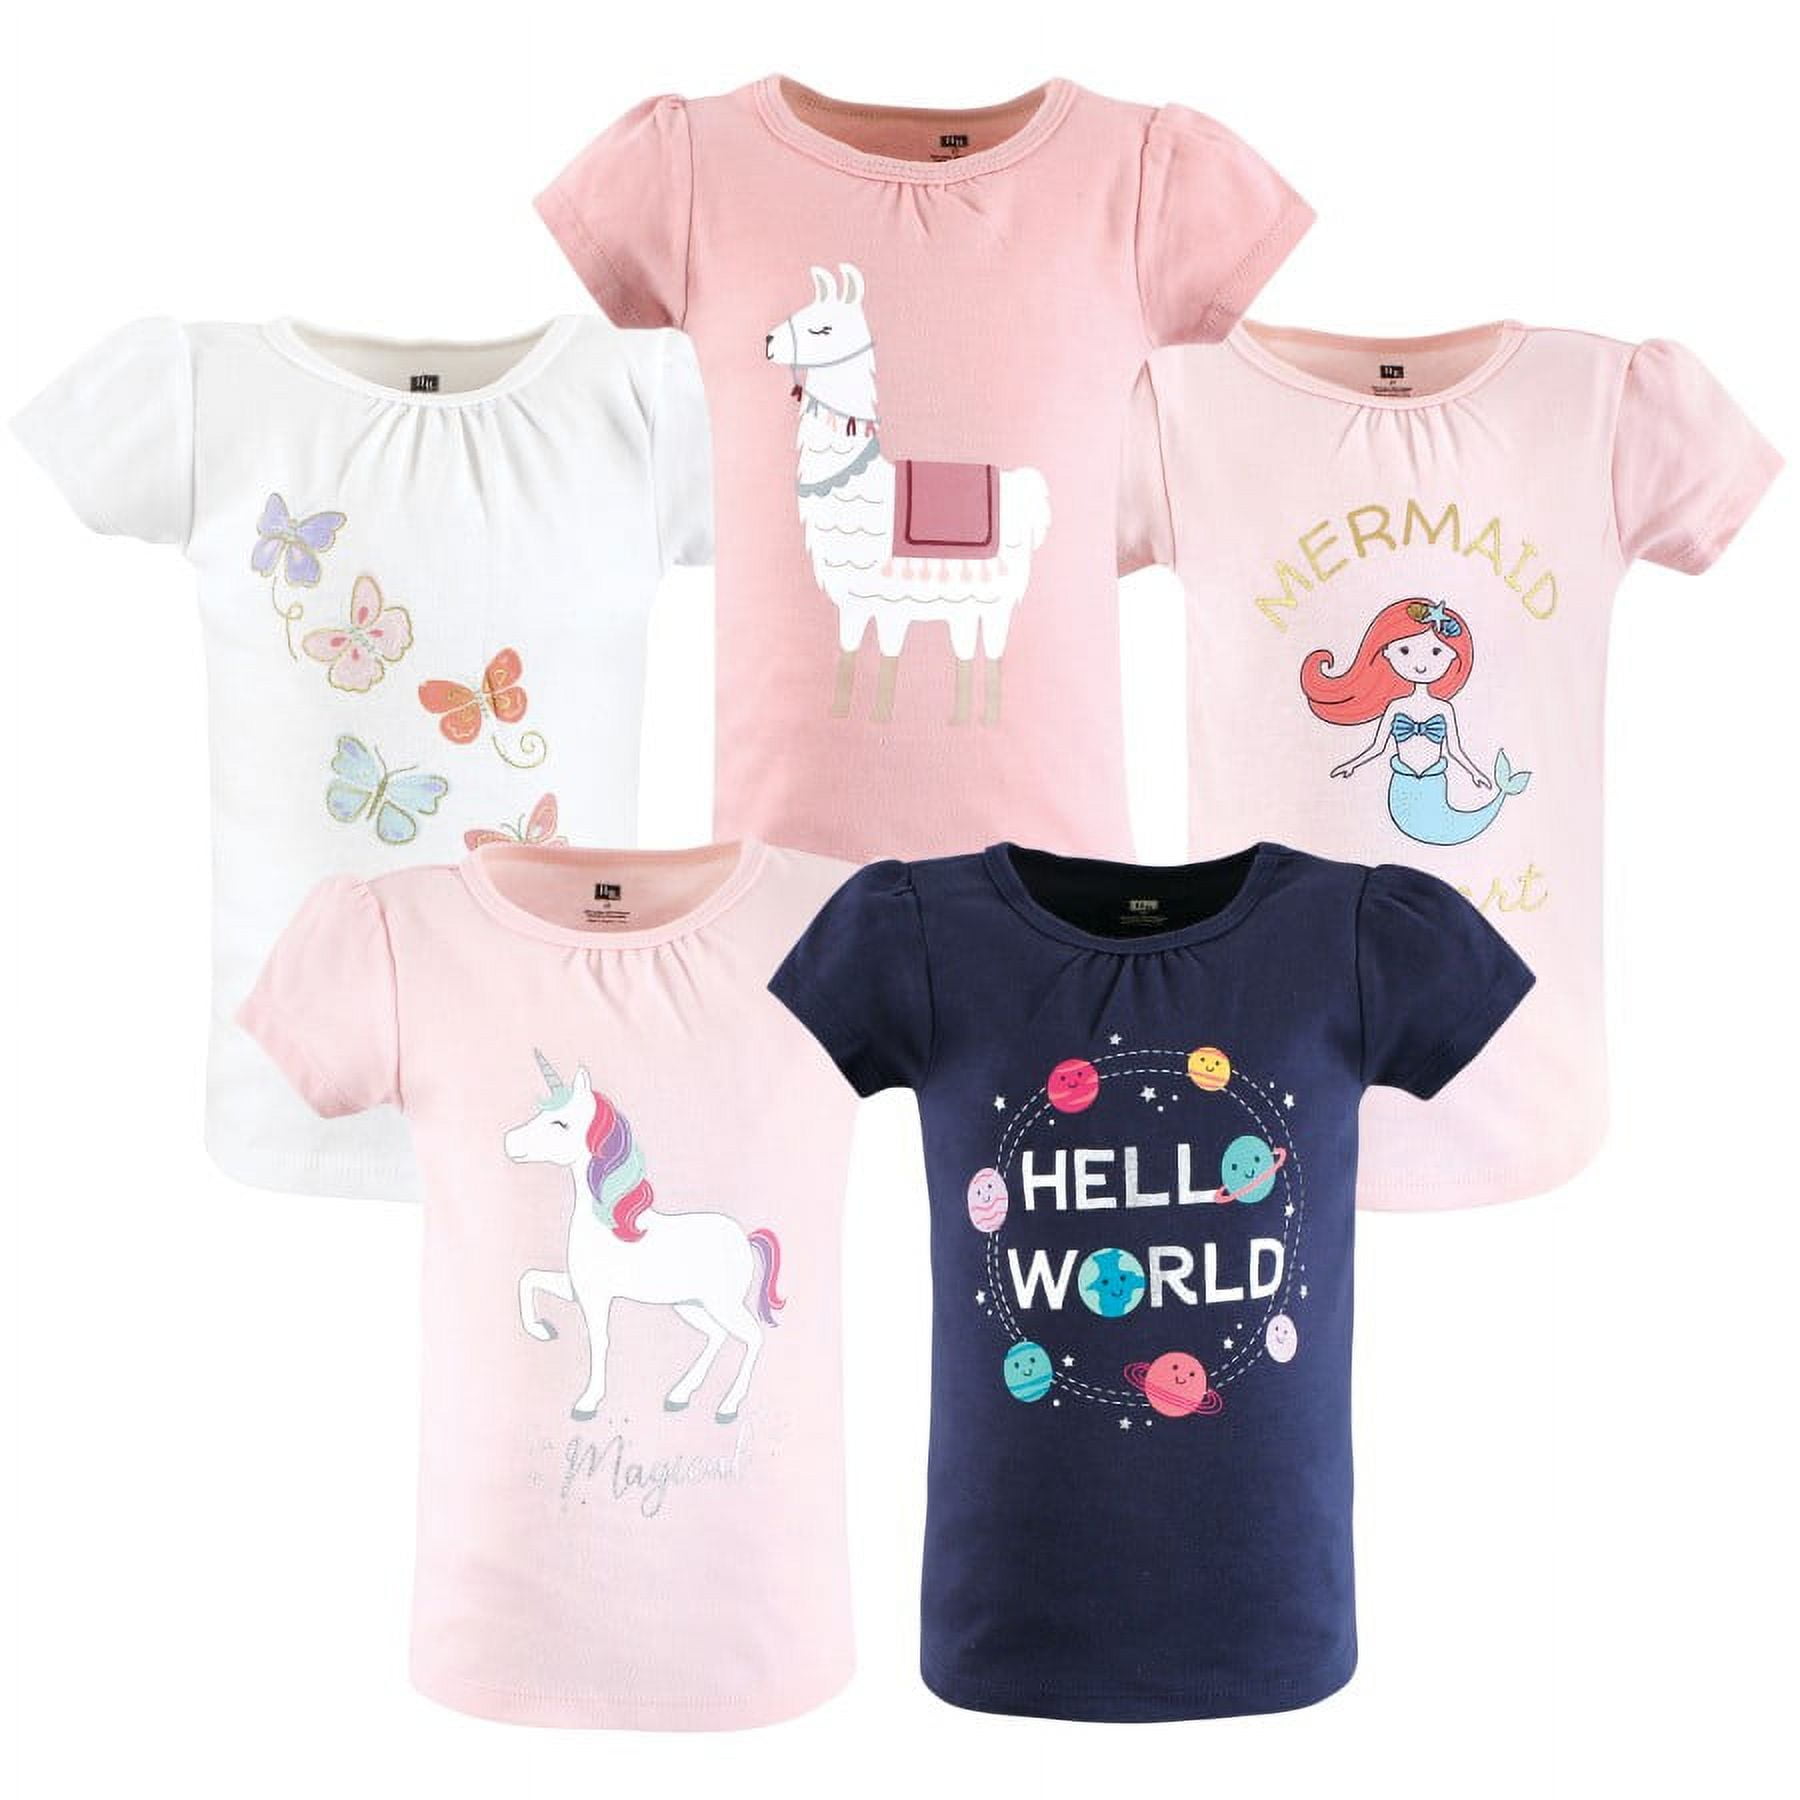 Hudson Baby Infant and Toddler Girl Short Sleeve T-Shirts, Magical ...